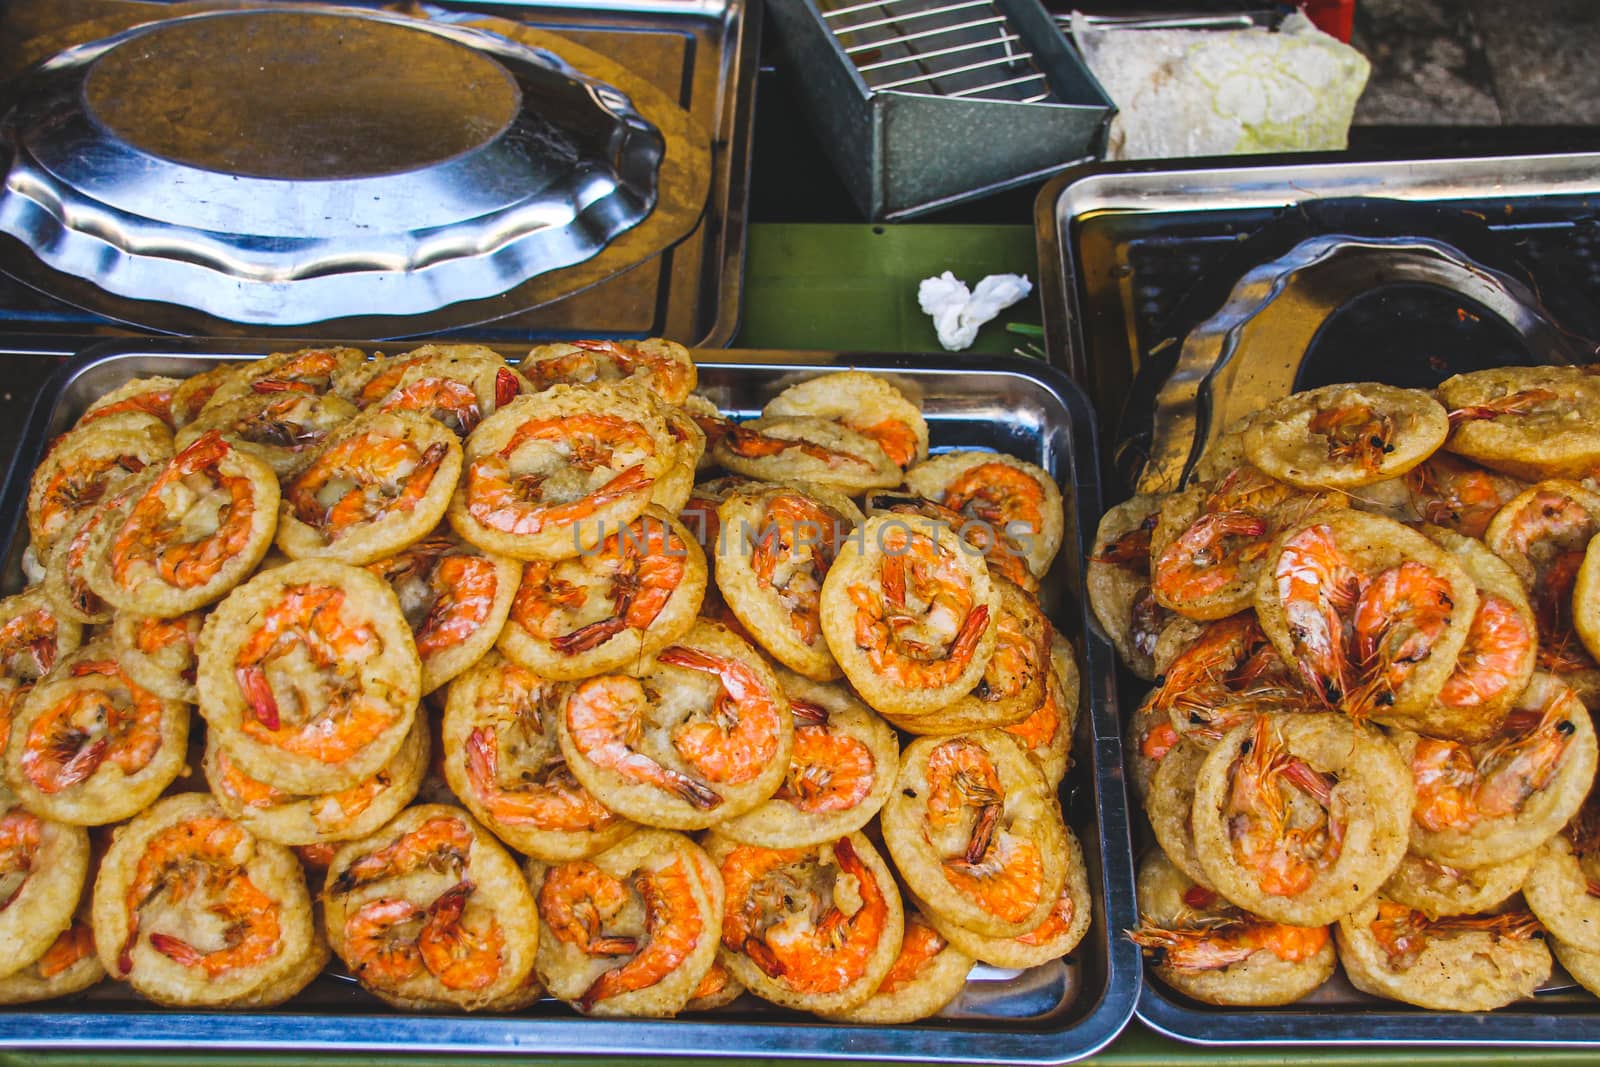 Vietnamese shrimp pancake or Banh Tom, a popular local delicacy sold in the streets of Hanoi, Vietnam